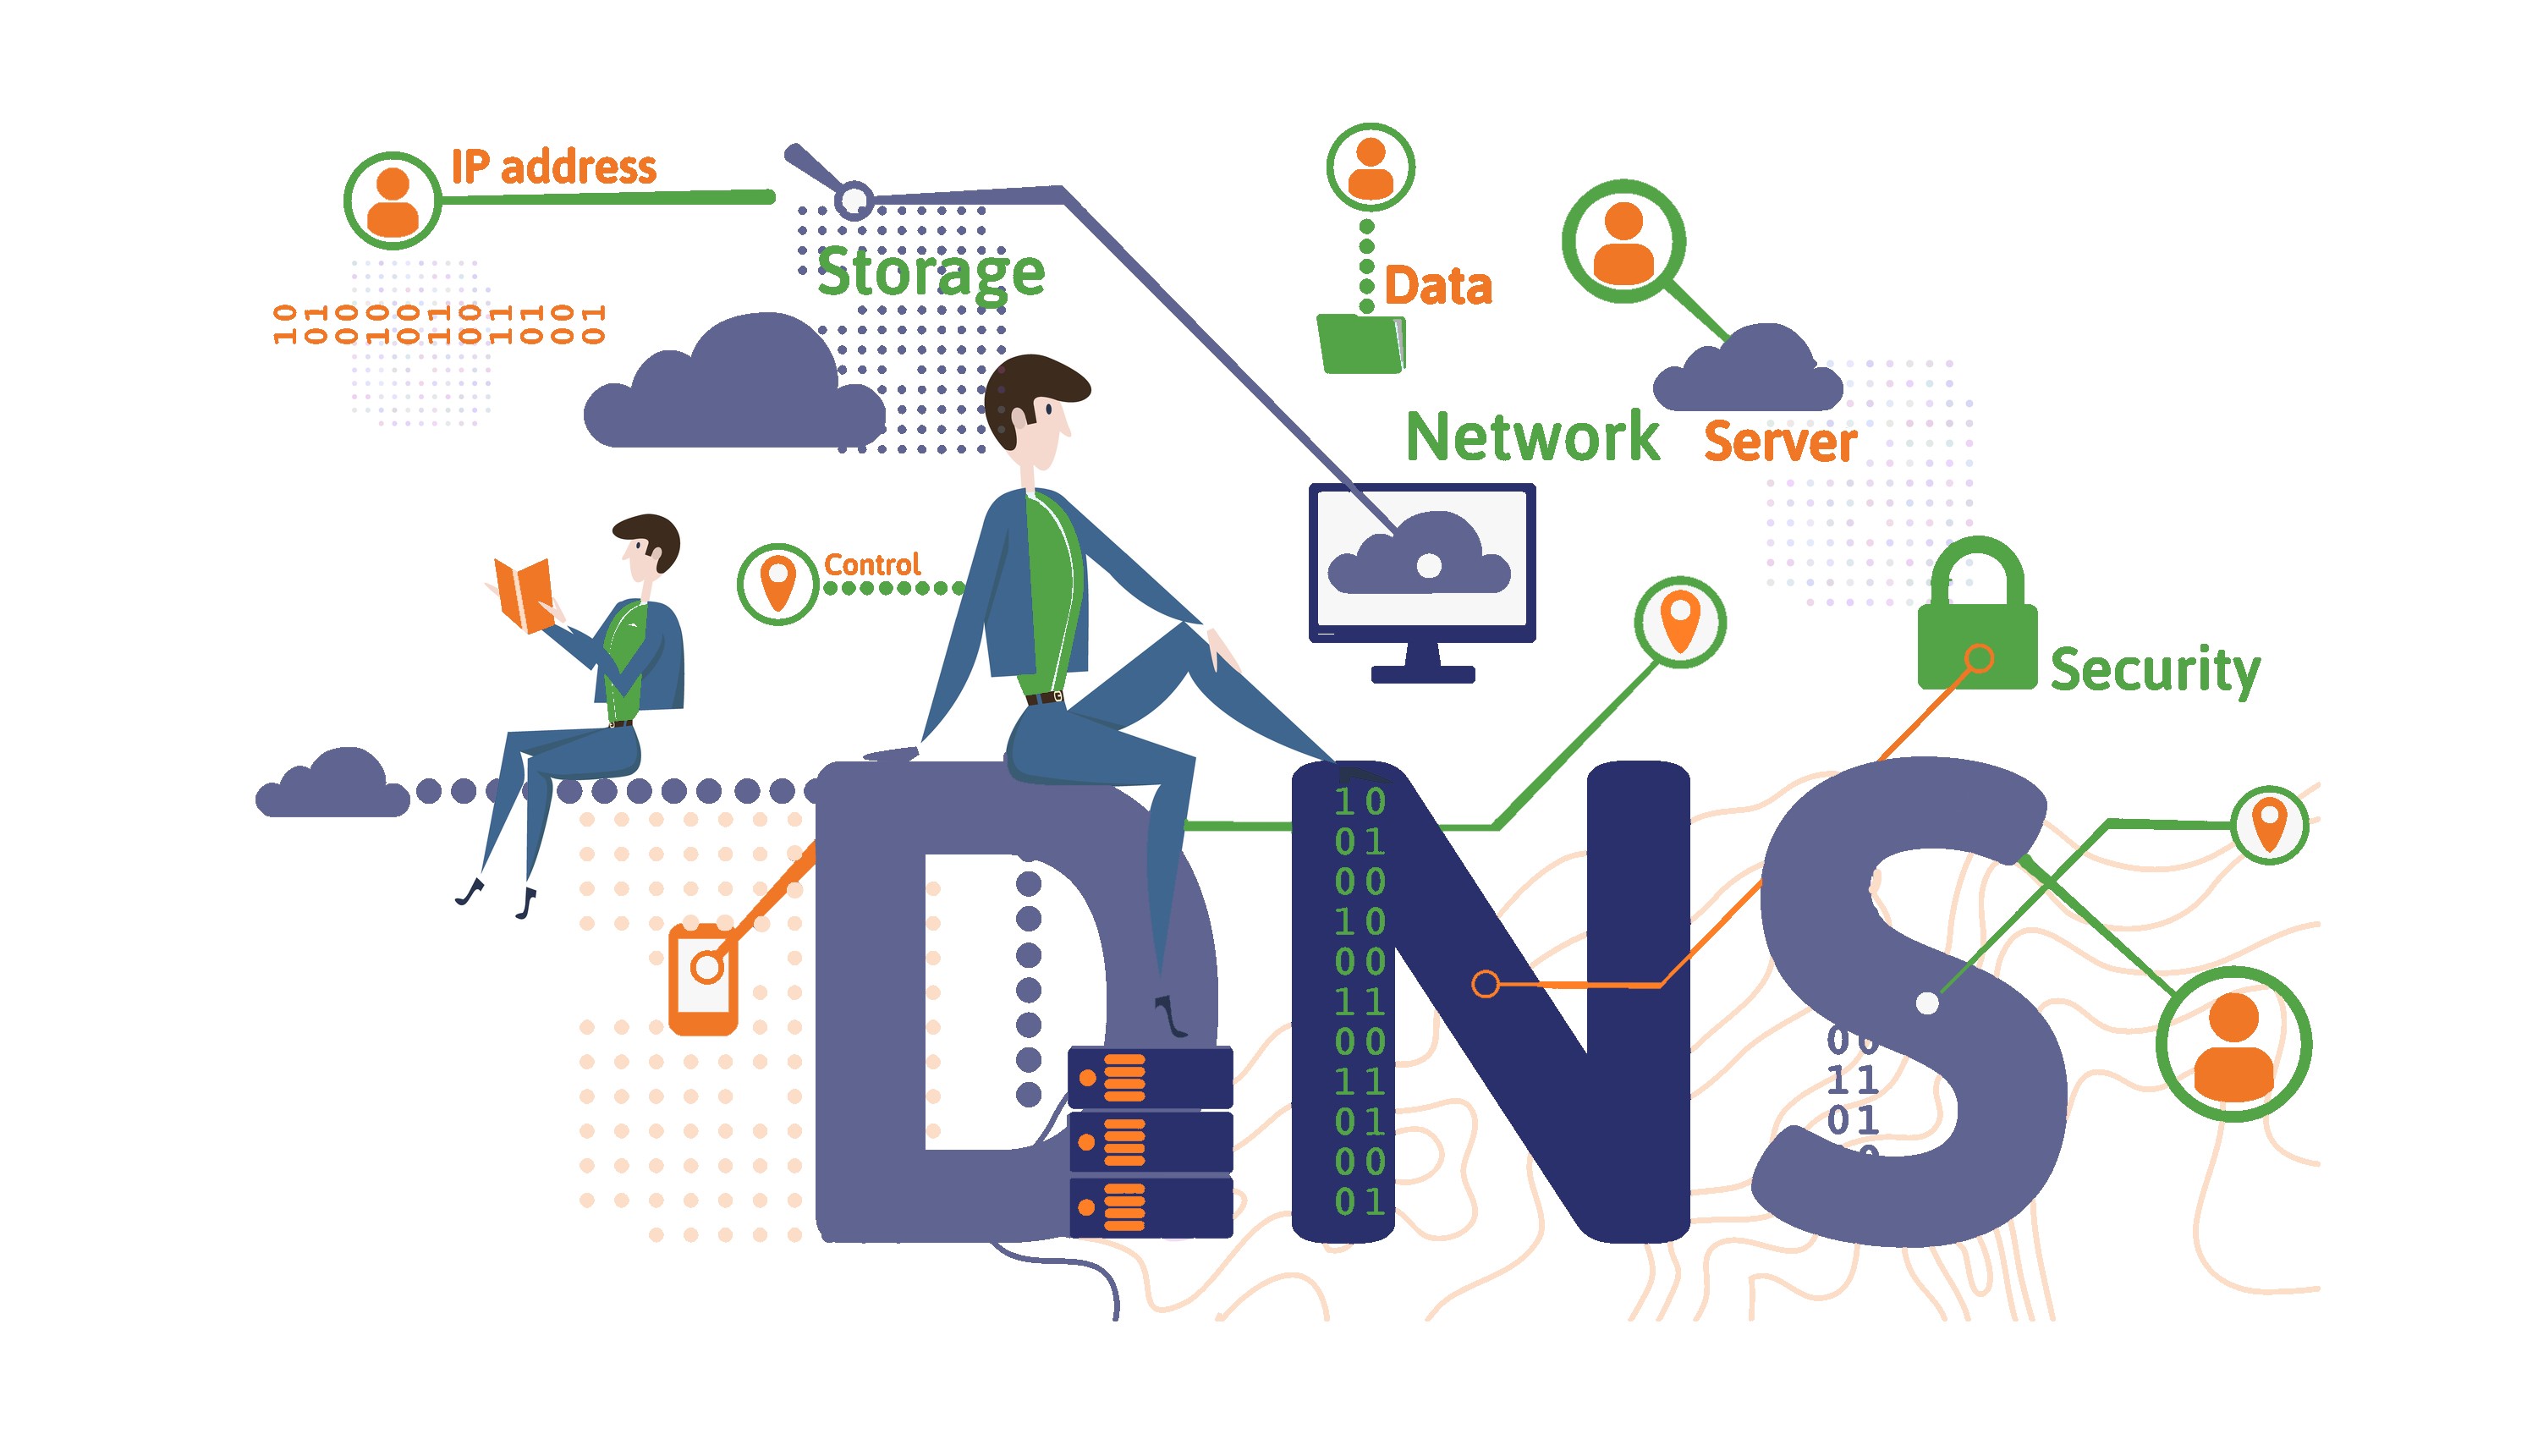 What is DNS and how does it work?